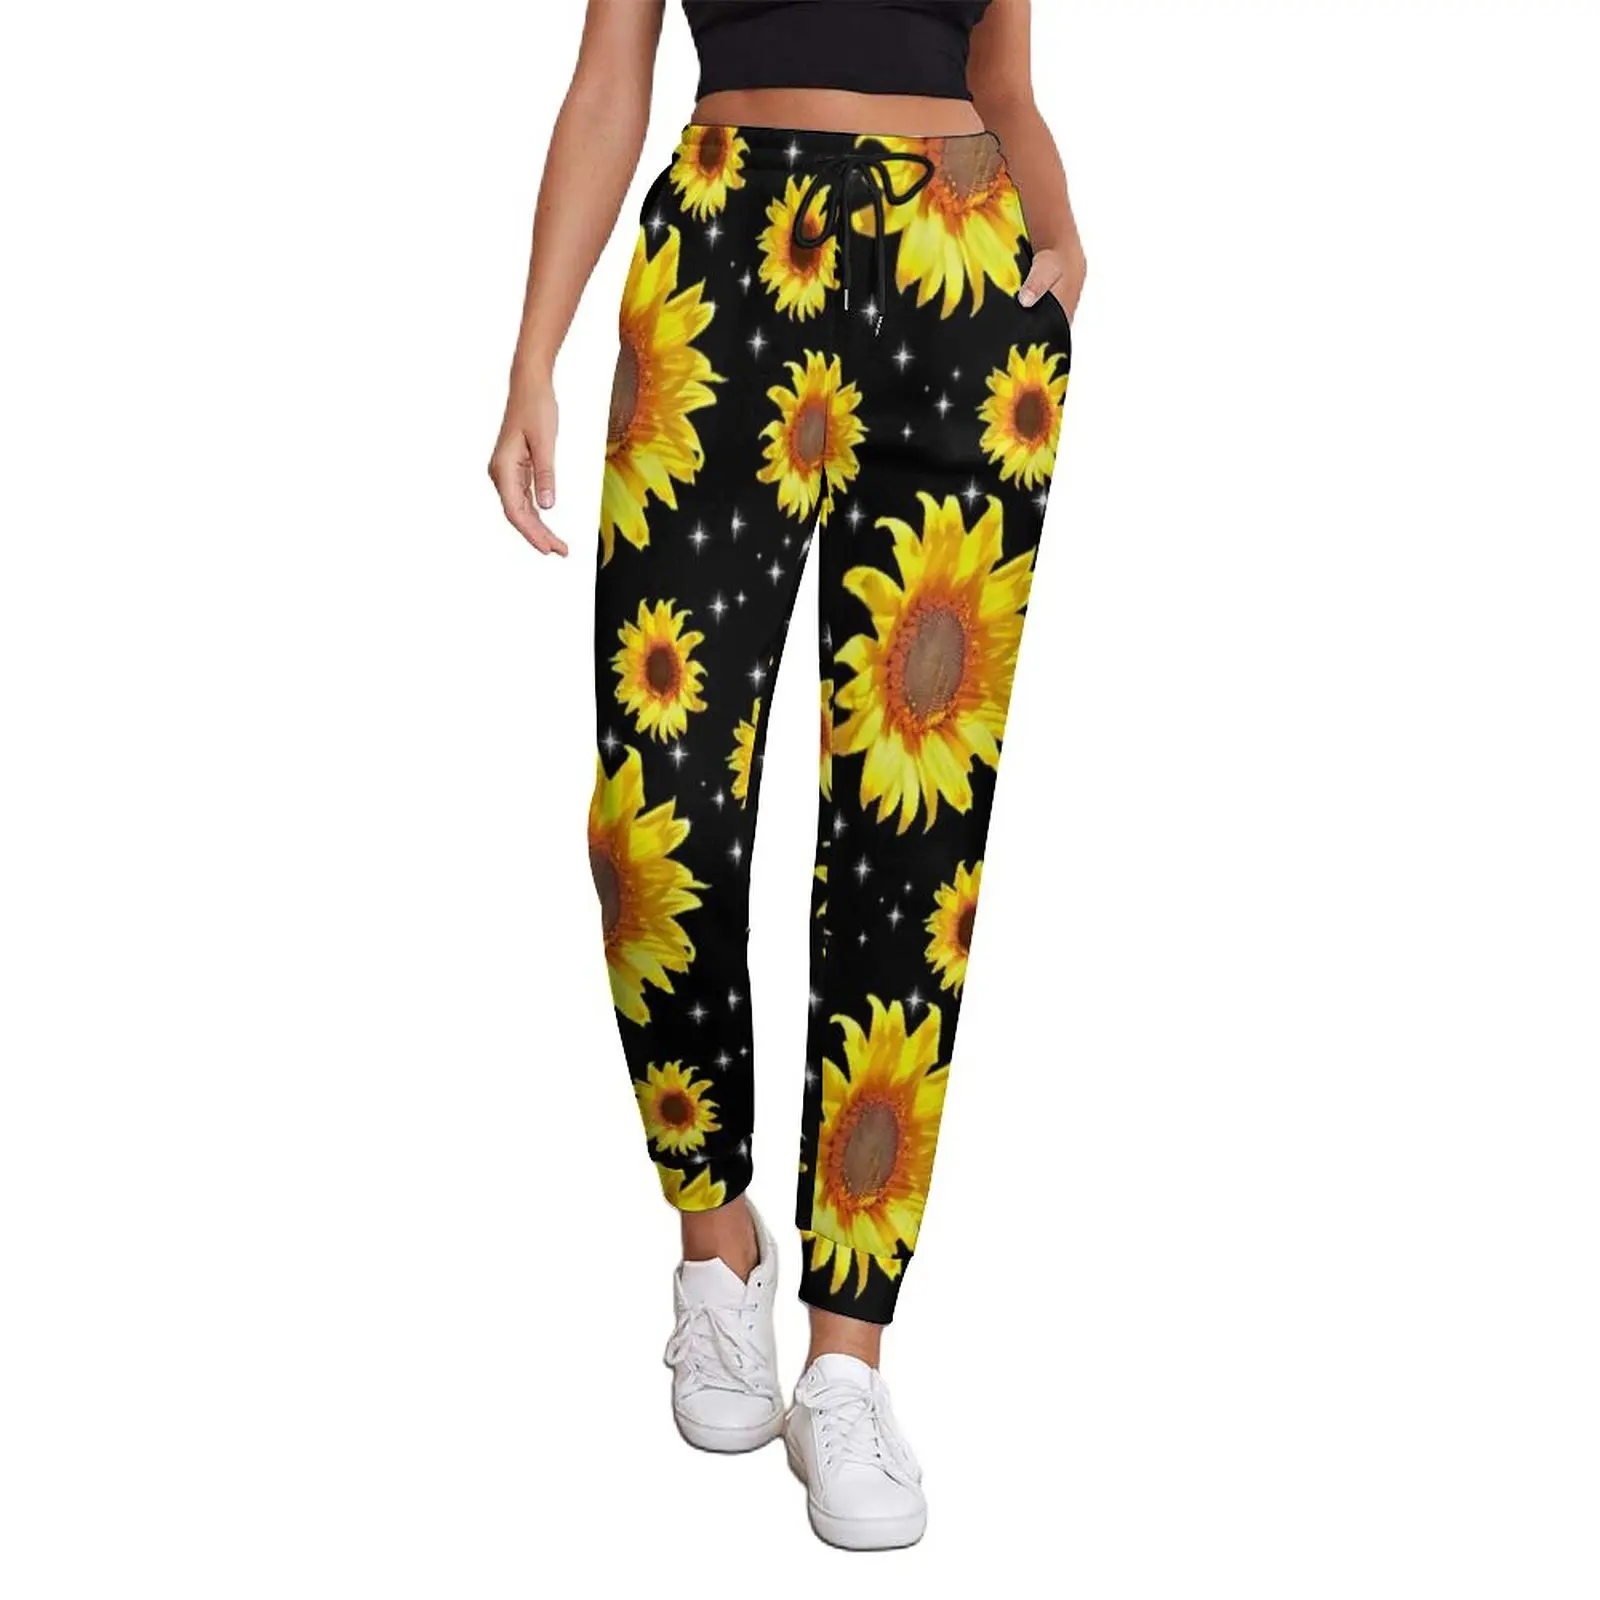 

Sunflower Art Pants Ladies The Stars of Sunflowers Print Harajuku Sweatpants Spring Casual Graphic Trousers Big Size 3XL